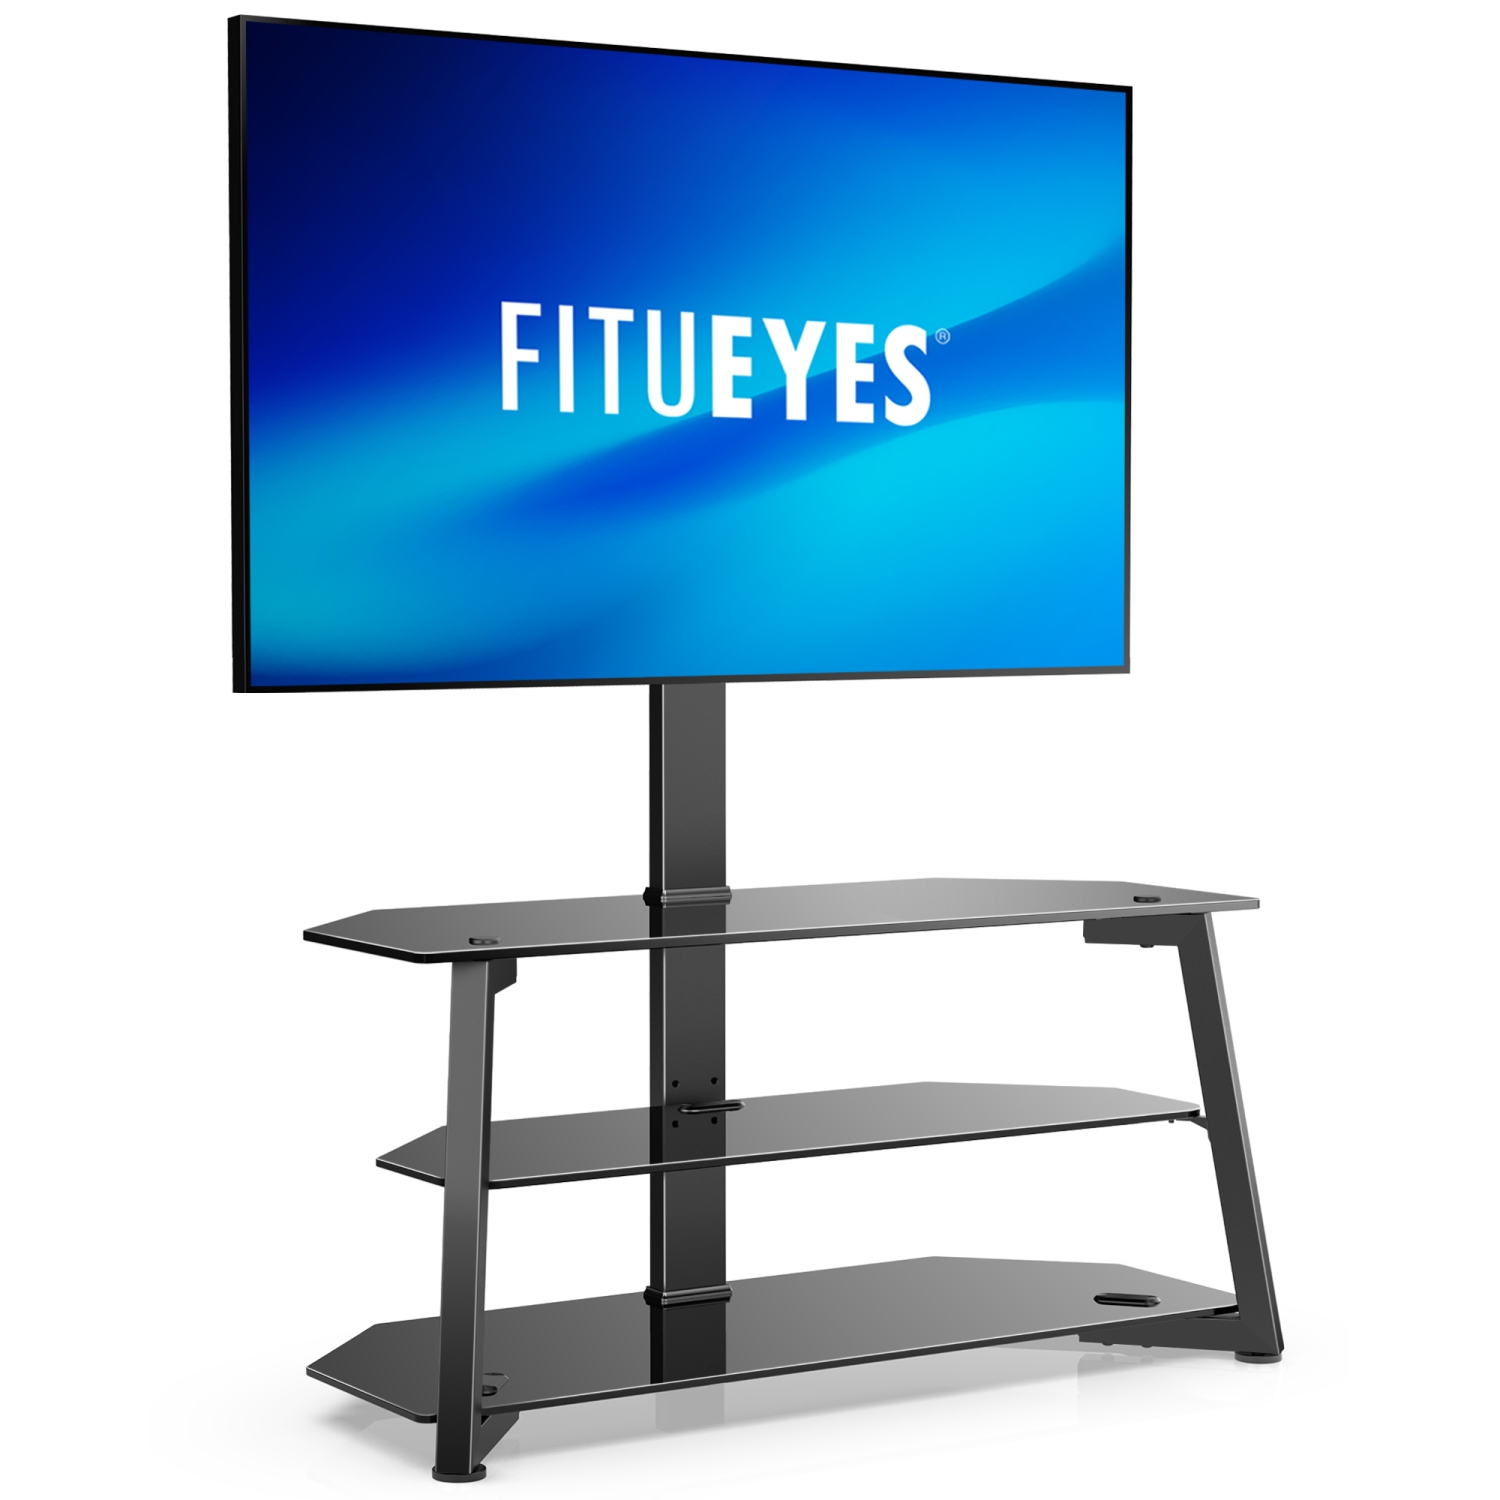 FITUEYES Glass TV Stand Mount 3 Tier for 32 to 65 inches Flat Curved Screen Height Adjustable Media Console Max VESA 600x400 mm